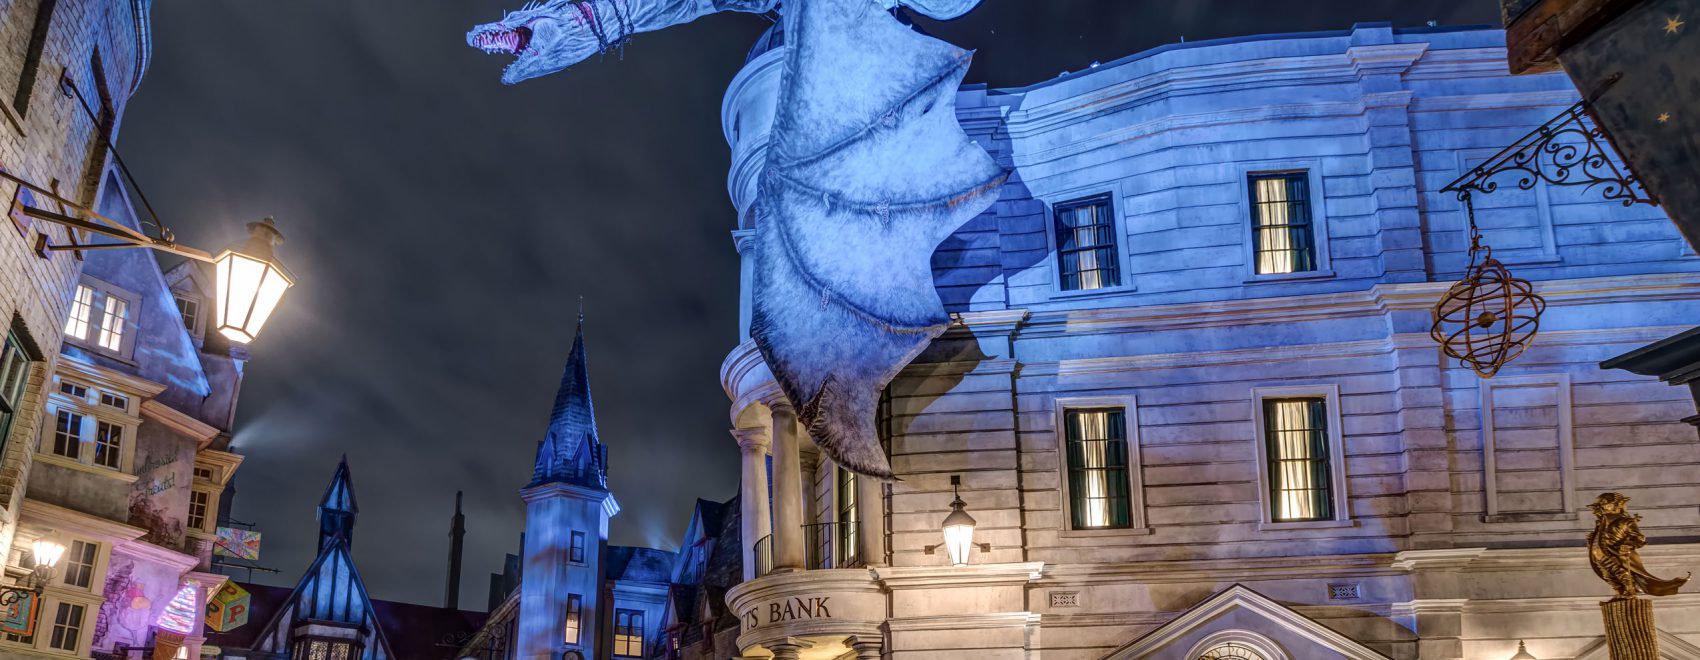 Visit the Wizarding World of Harry Potter at Universal Studios